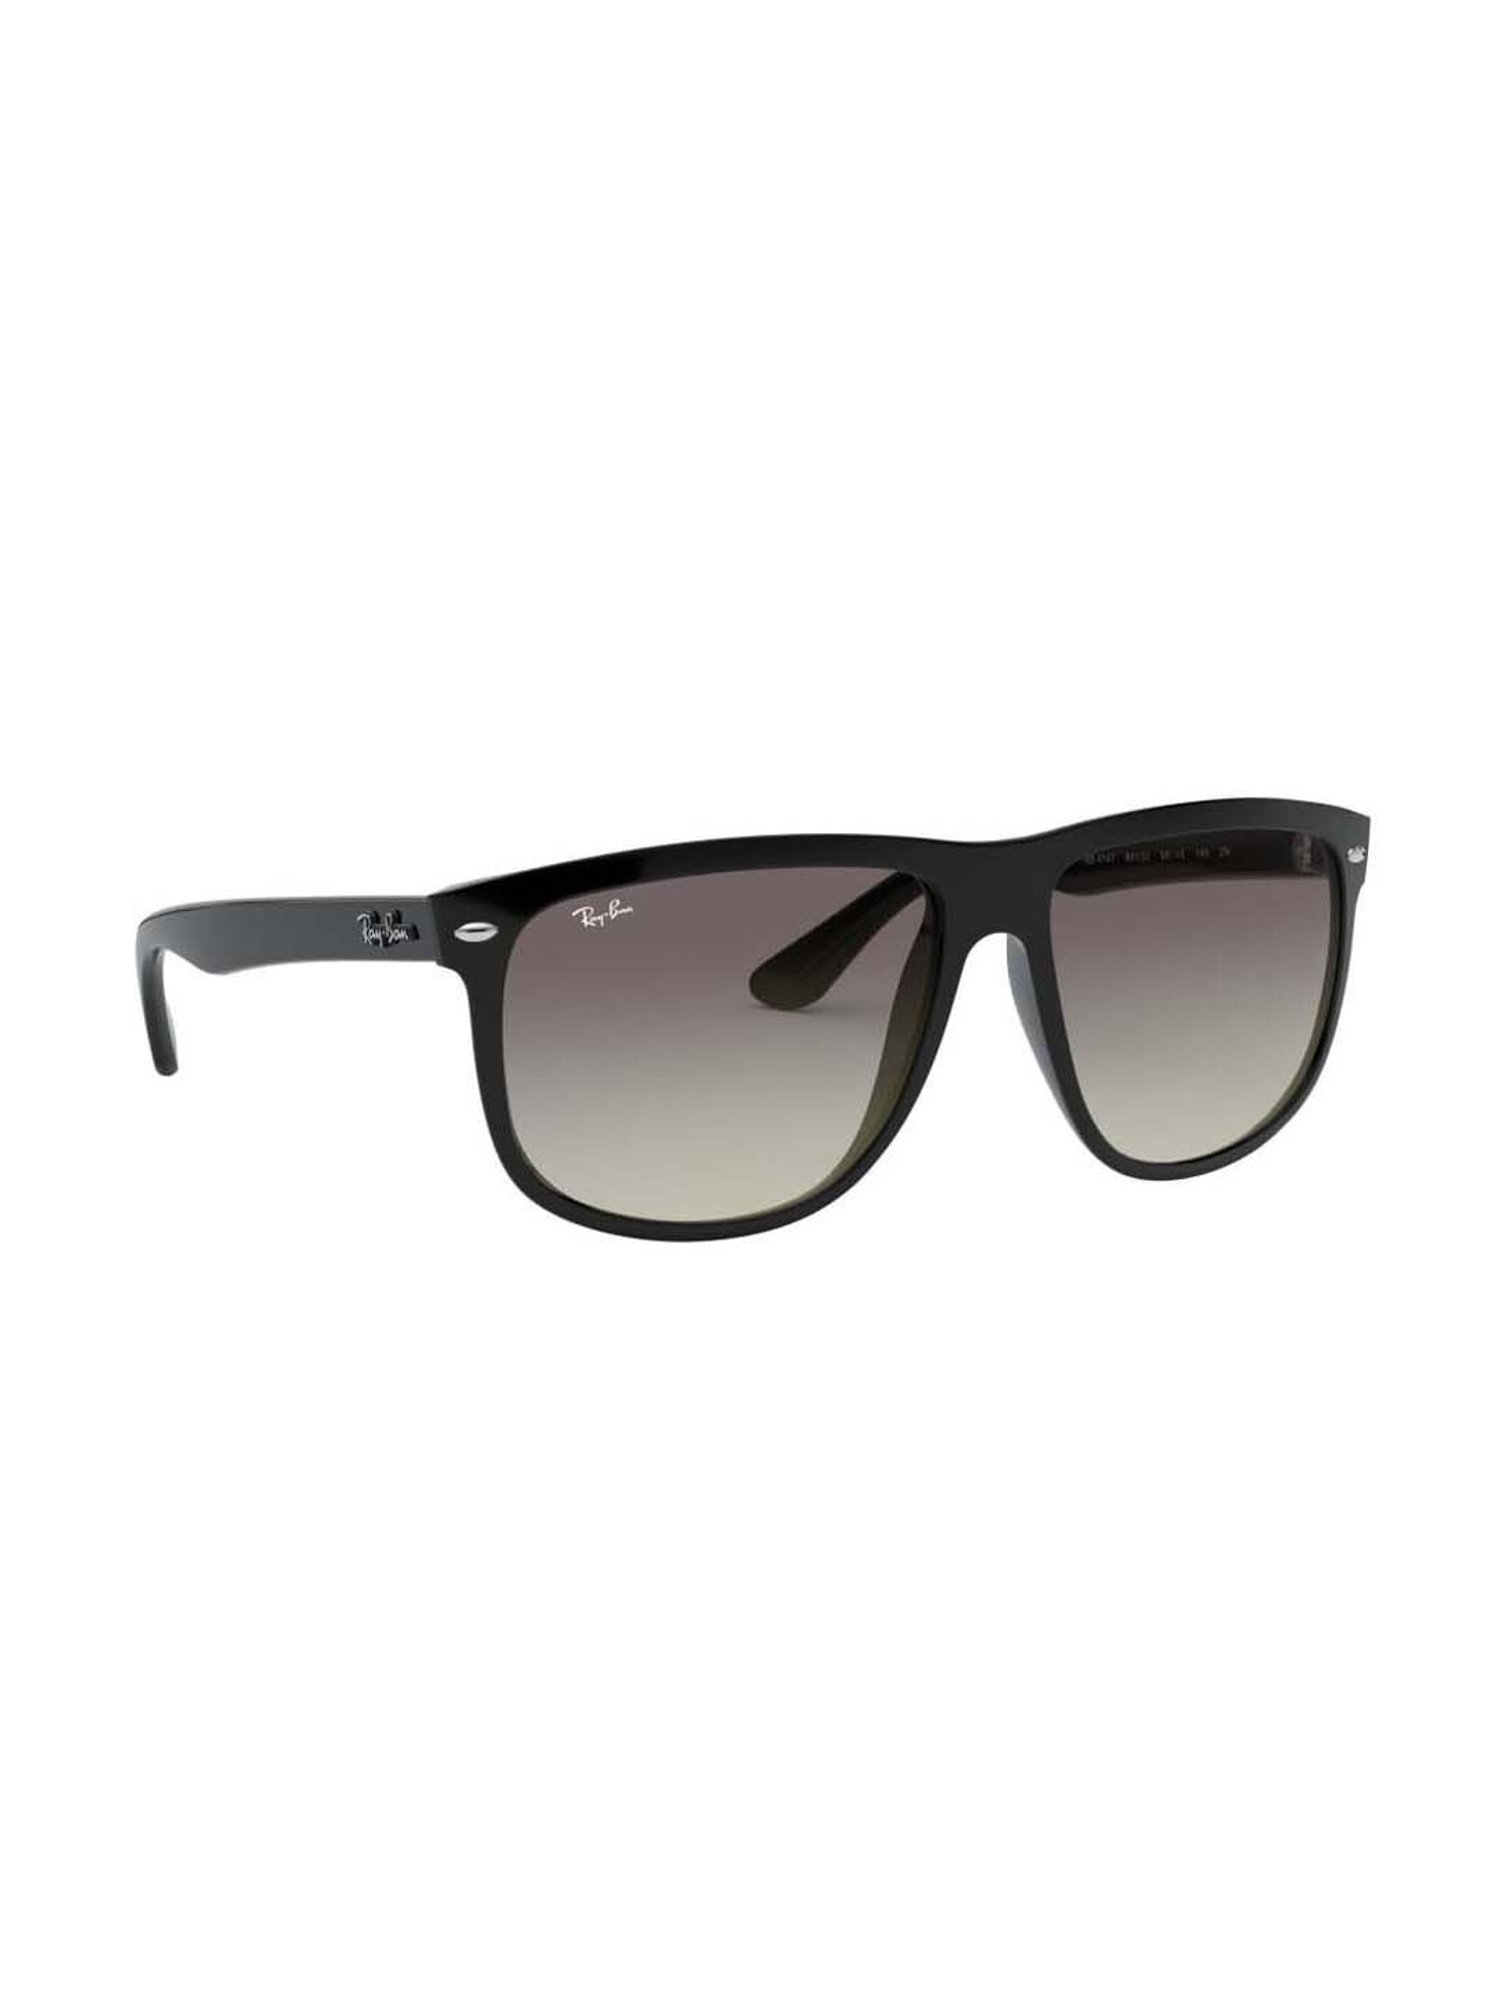 Buy Ray-Ban 0RB4147 Light Grey Gradient Square Sunglasses - 60 mm 